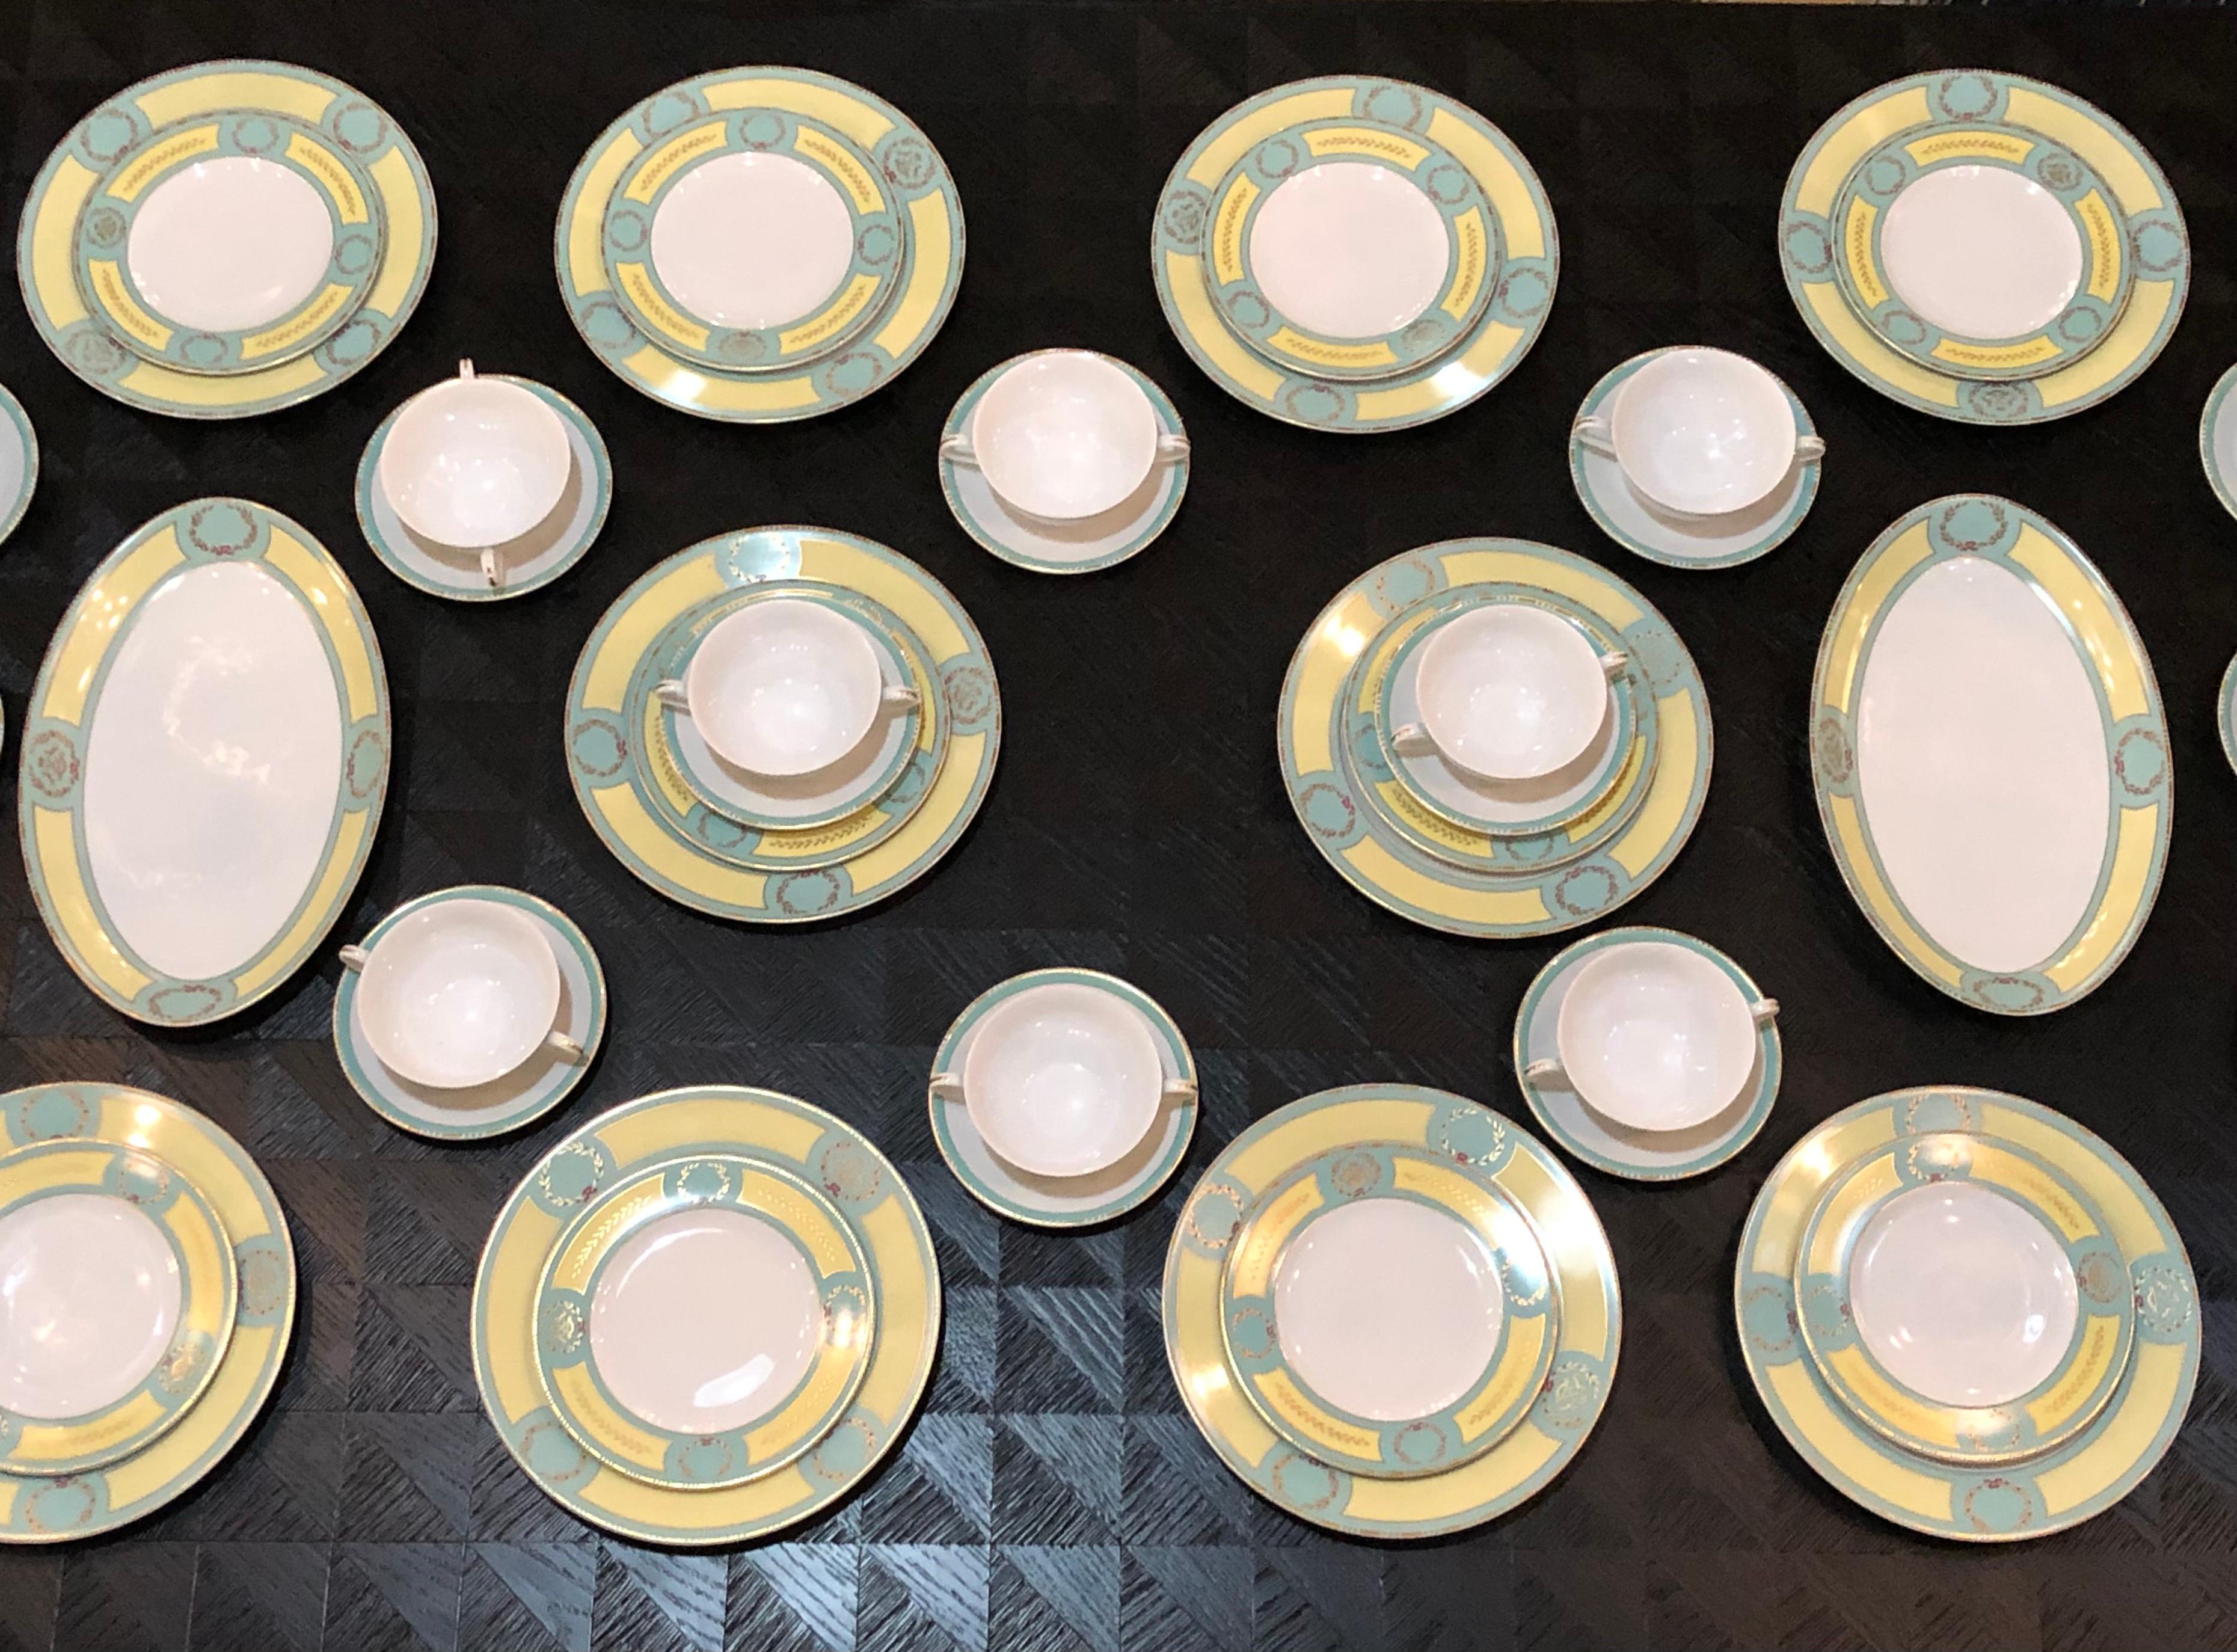 64 pieces Royal Limoges France Porcelain dinner set. A French France Limoges group or suite of porcelain plates from the Hotel Meurice Paris, Sixty-four pieces in all. This set has rarely ever been used. Purchased directly from the executive suite